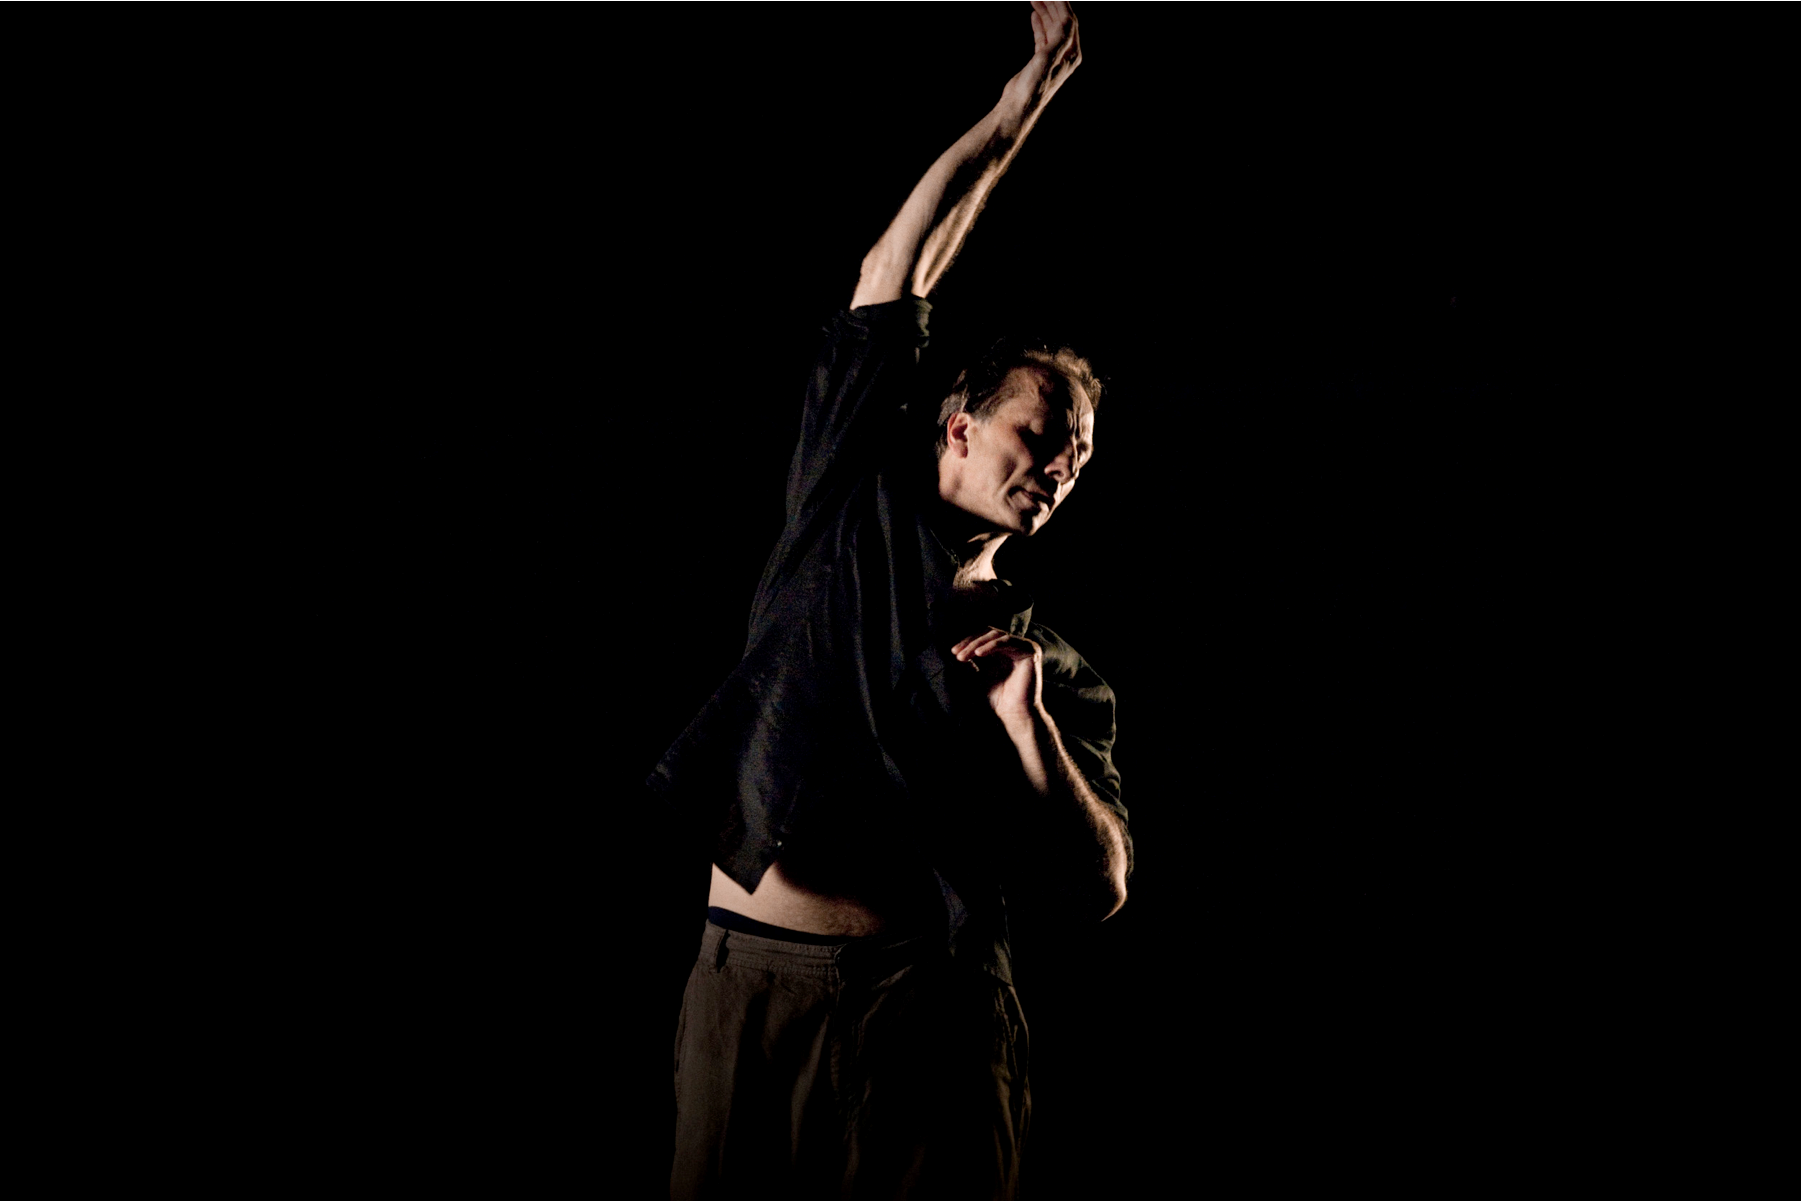 The choreographer in a dance pose with his hand extended over his head